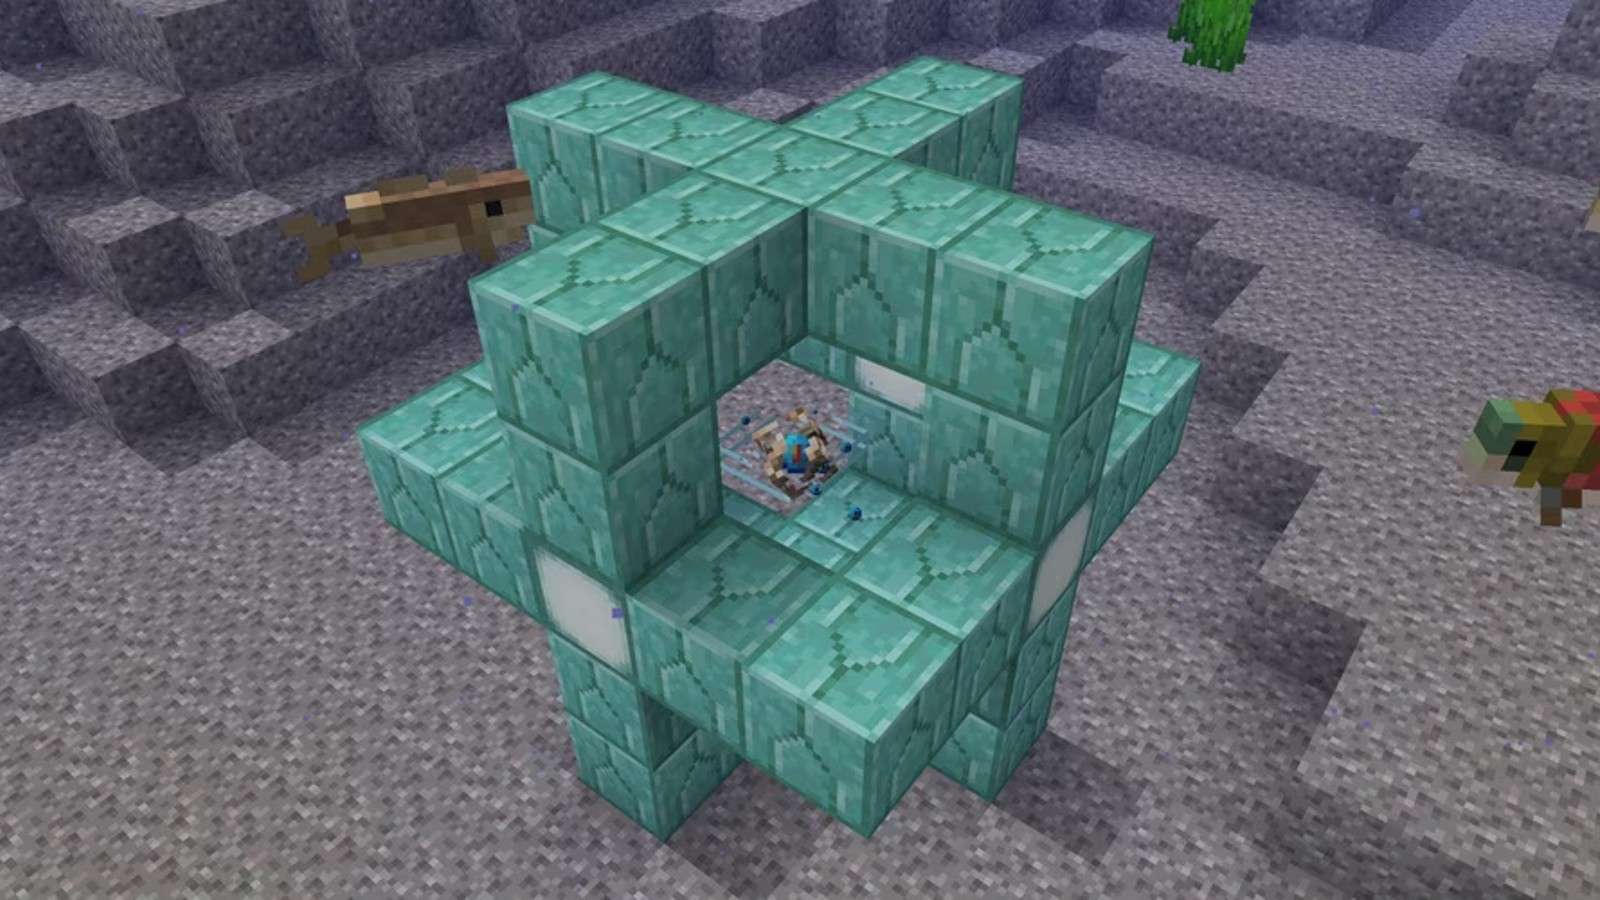 An image of the Heart of the Sea in Minecraft.